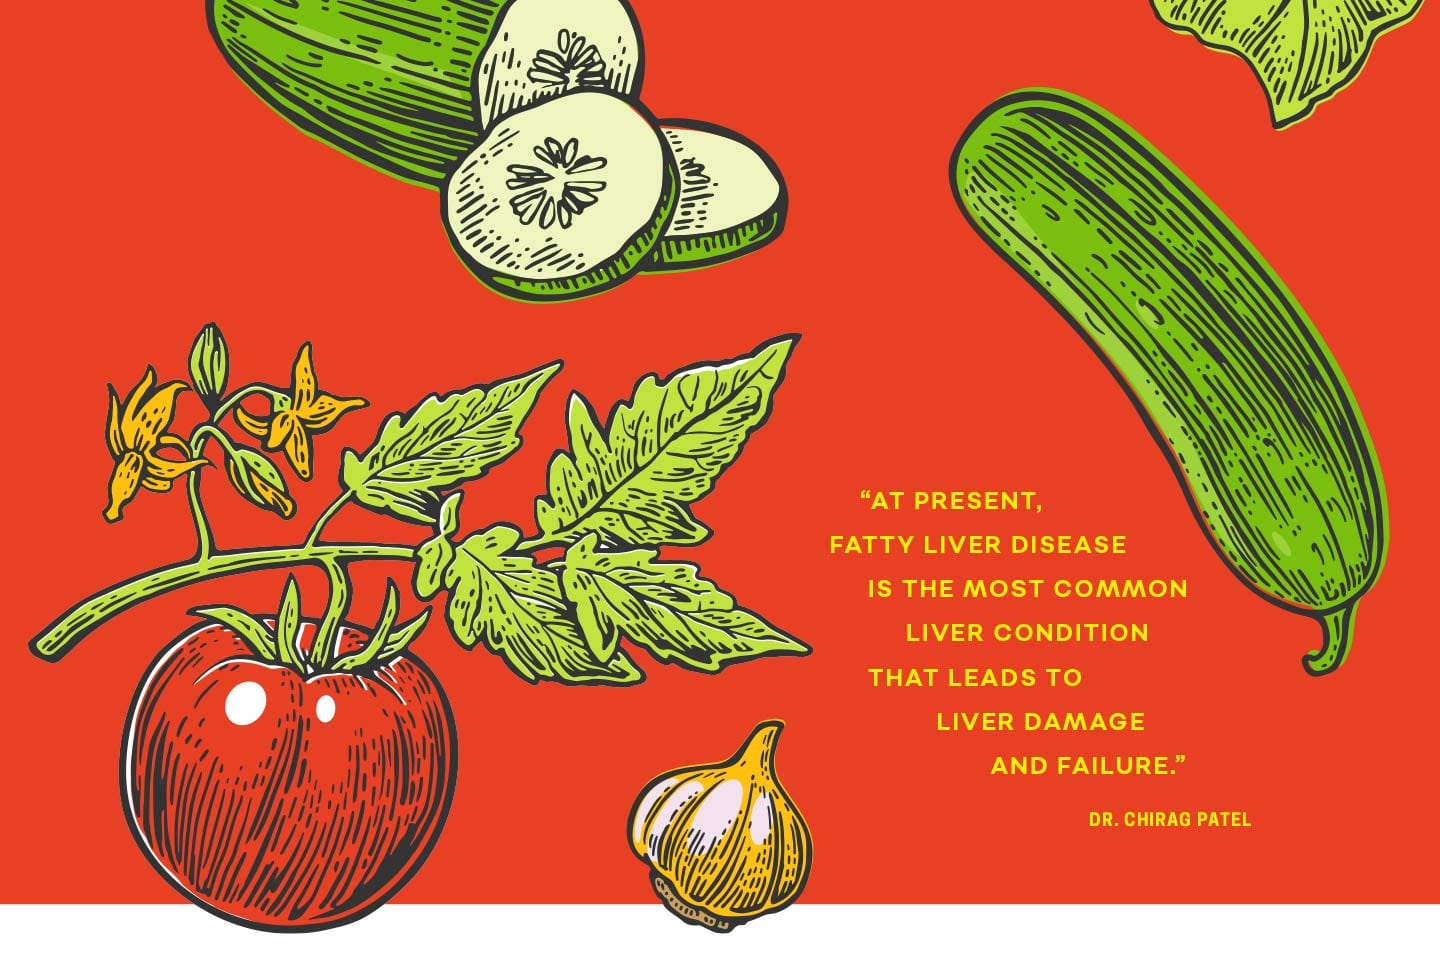 vegetable illustrations around a quote about fatty liver disease from a chattanooga doctor